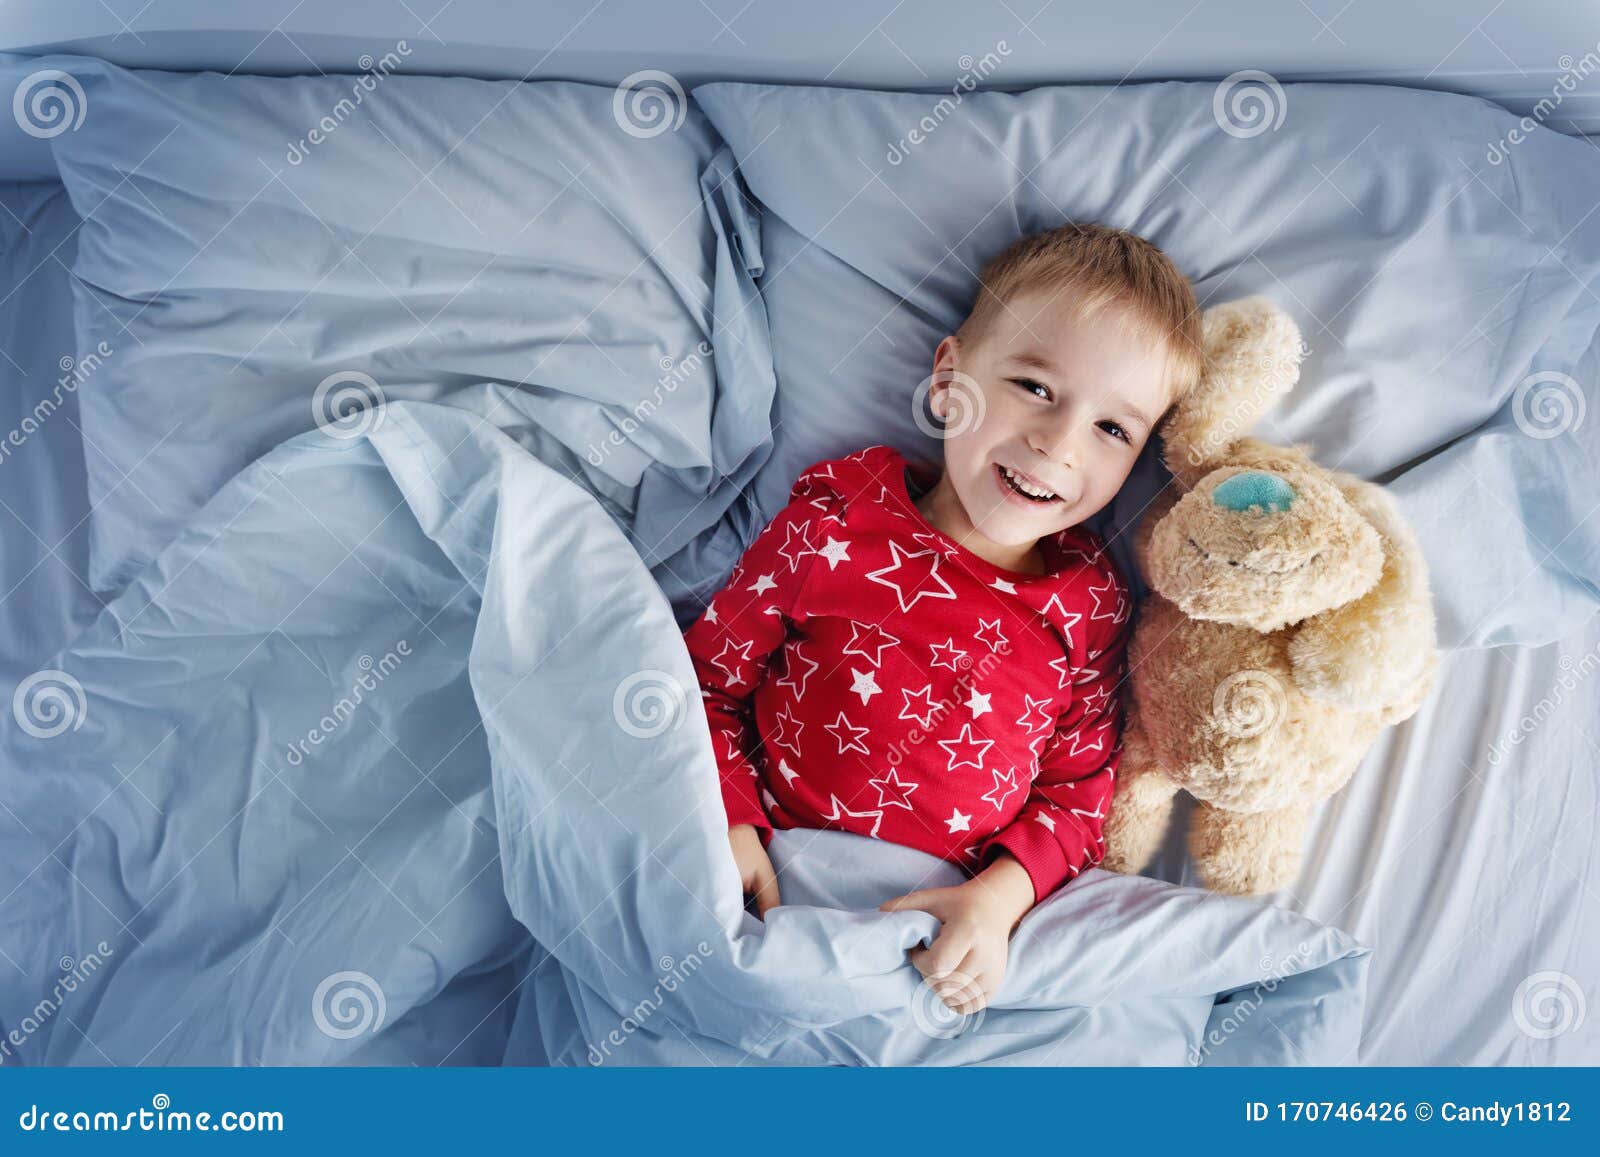 Sleepy Boy Lying In Bed With White Beddings Stock Photo Image Of